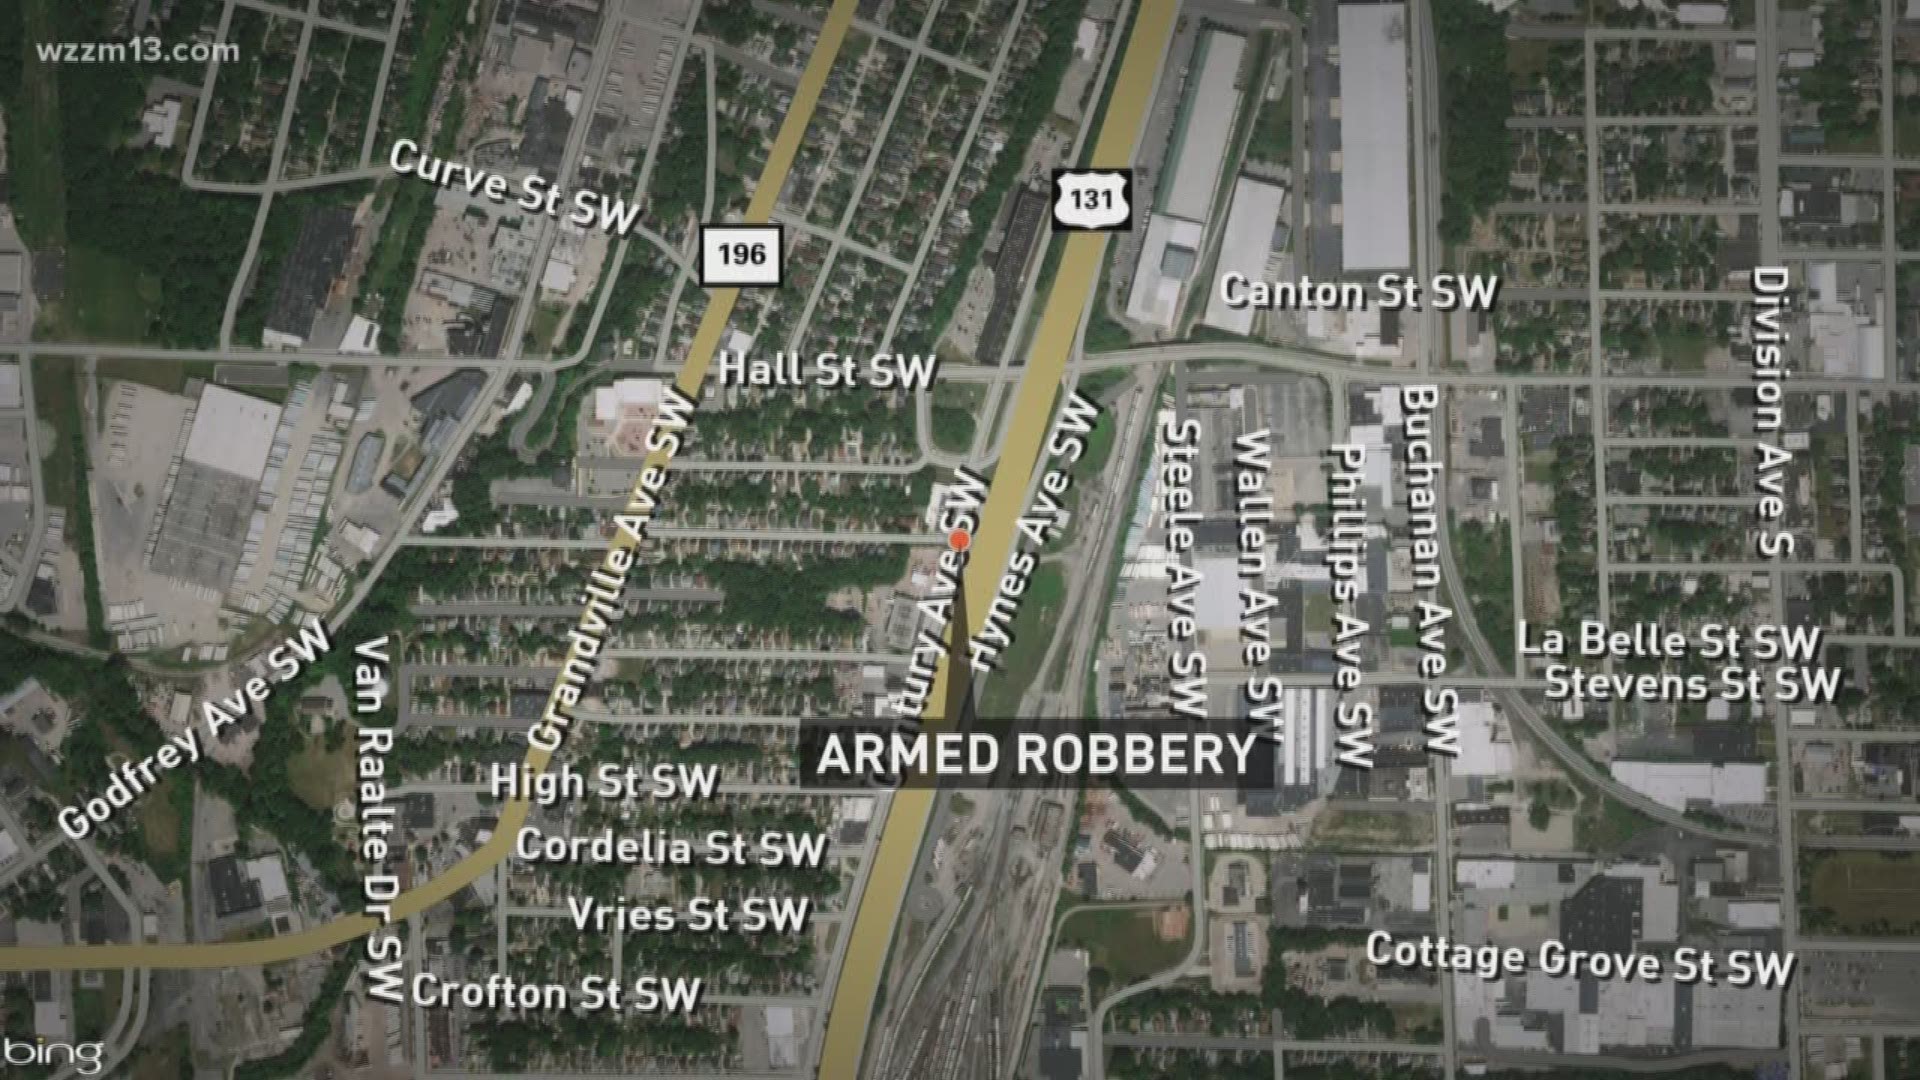 1 person hurt after armed robbery